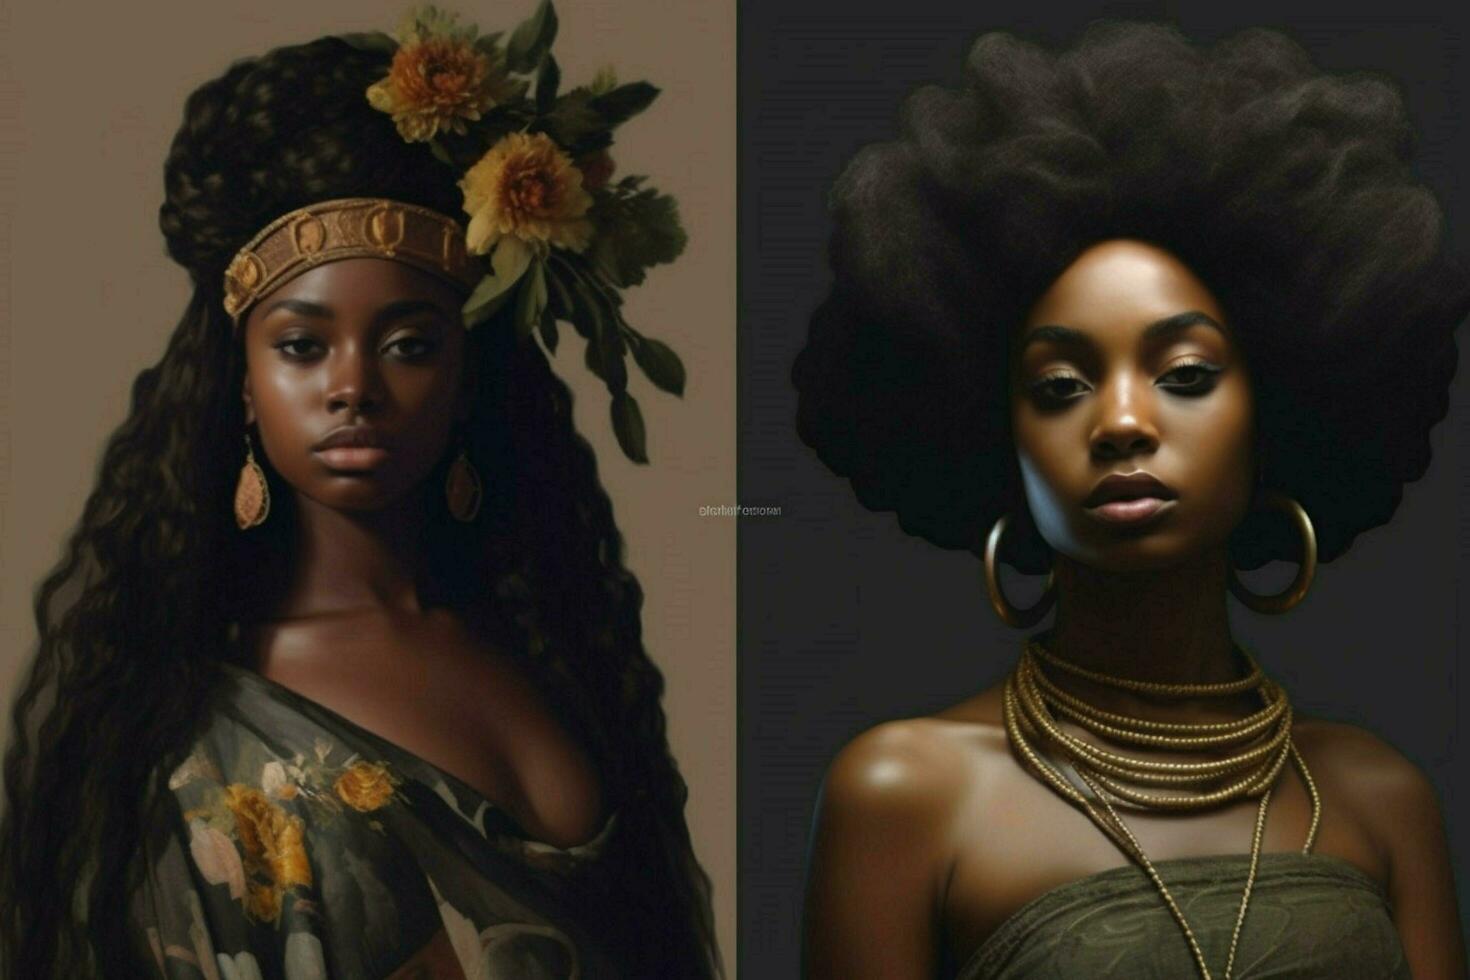 Celebrating the beauty and resilience of Blackness photo